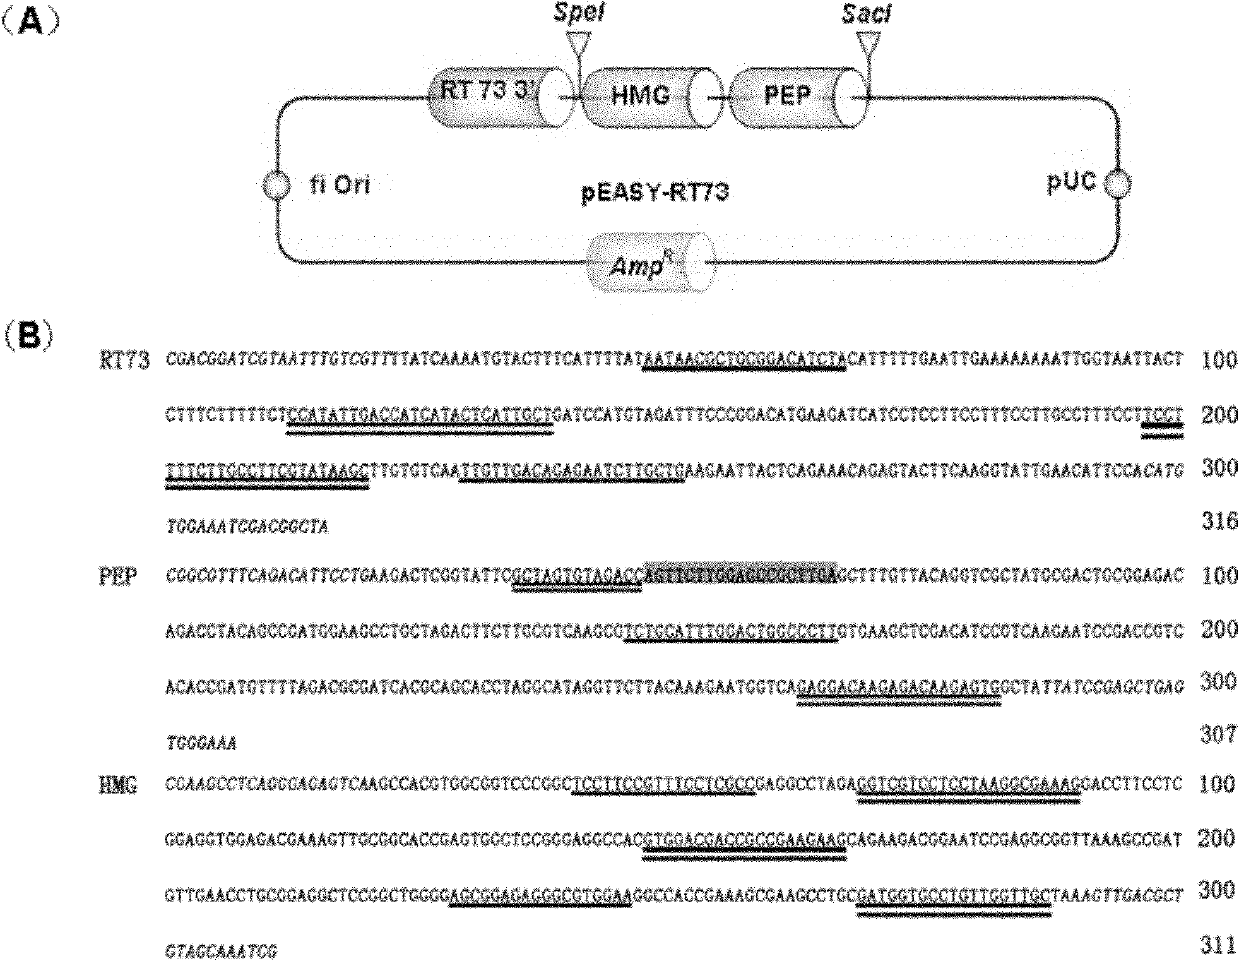 Reference molecule for specifically detecting genetically modified rapeseed RT73 and application of reference molecule